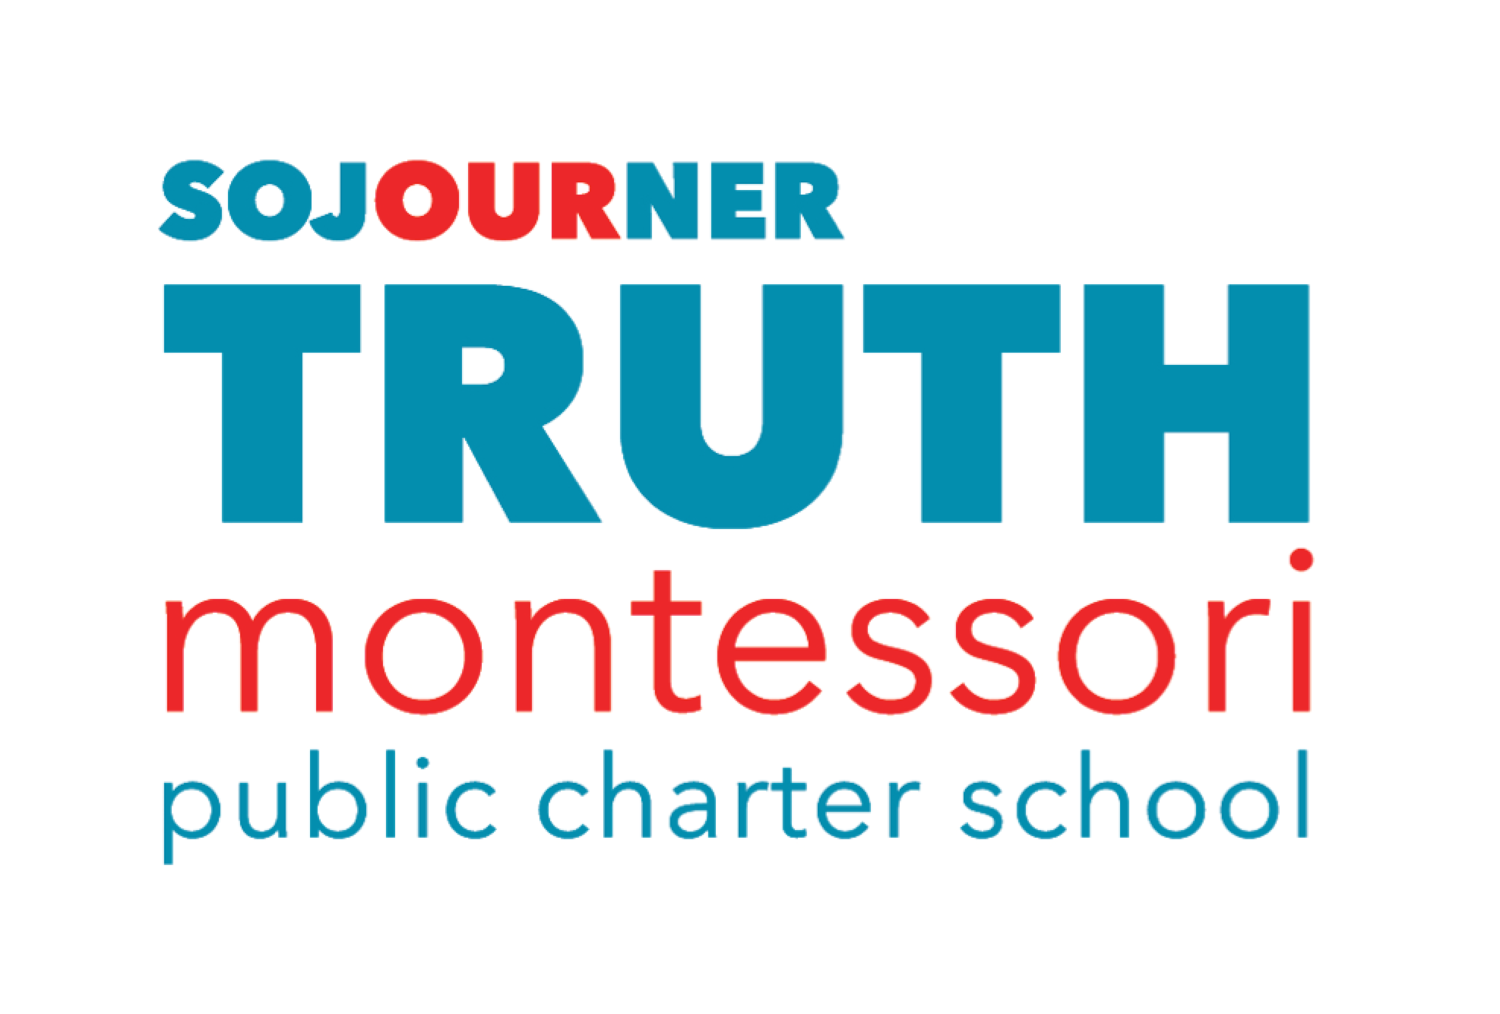 The Sojourner Truth School